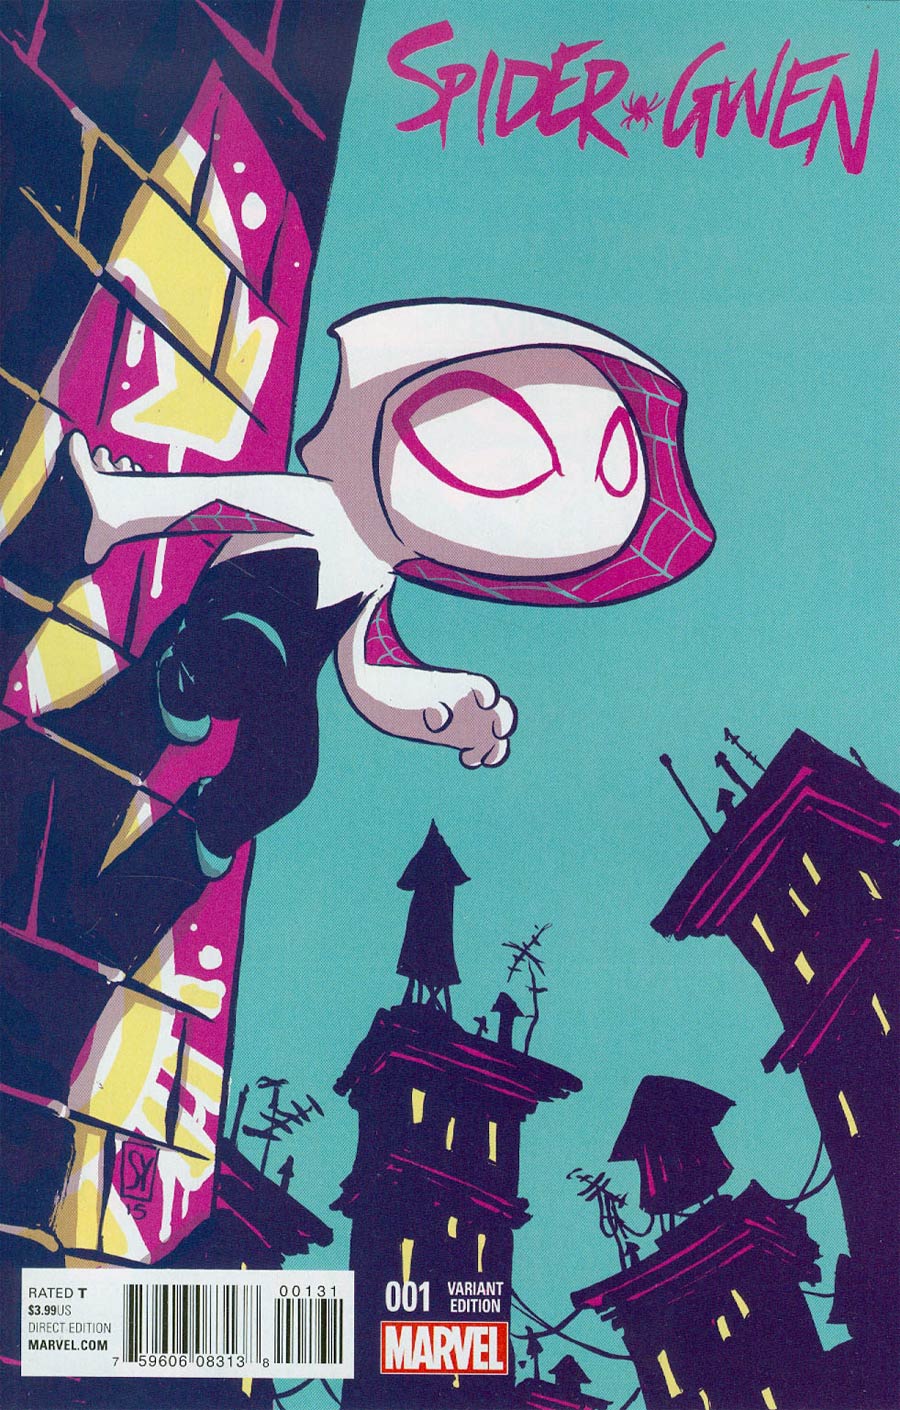 Spider-Gwen Vol 2 #1 Cover B Variant Skottie Young Baby Cover